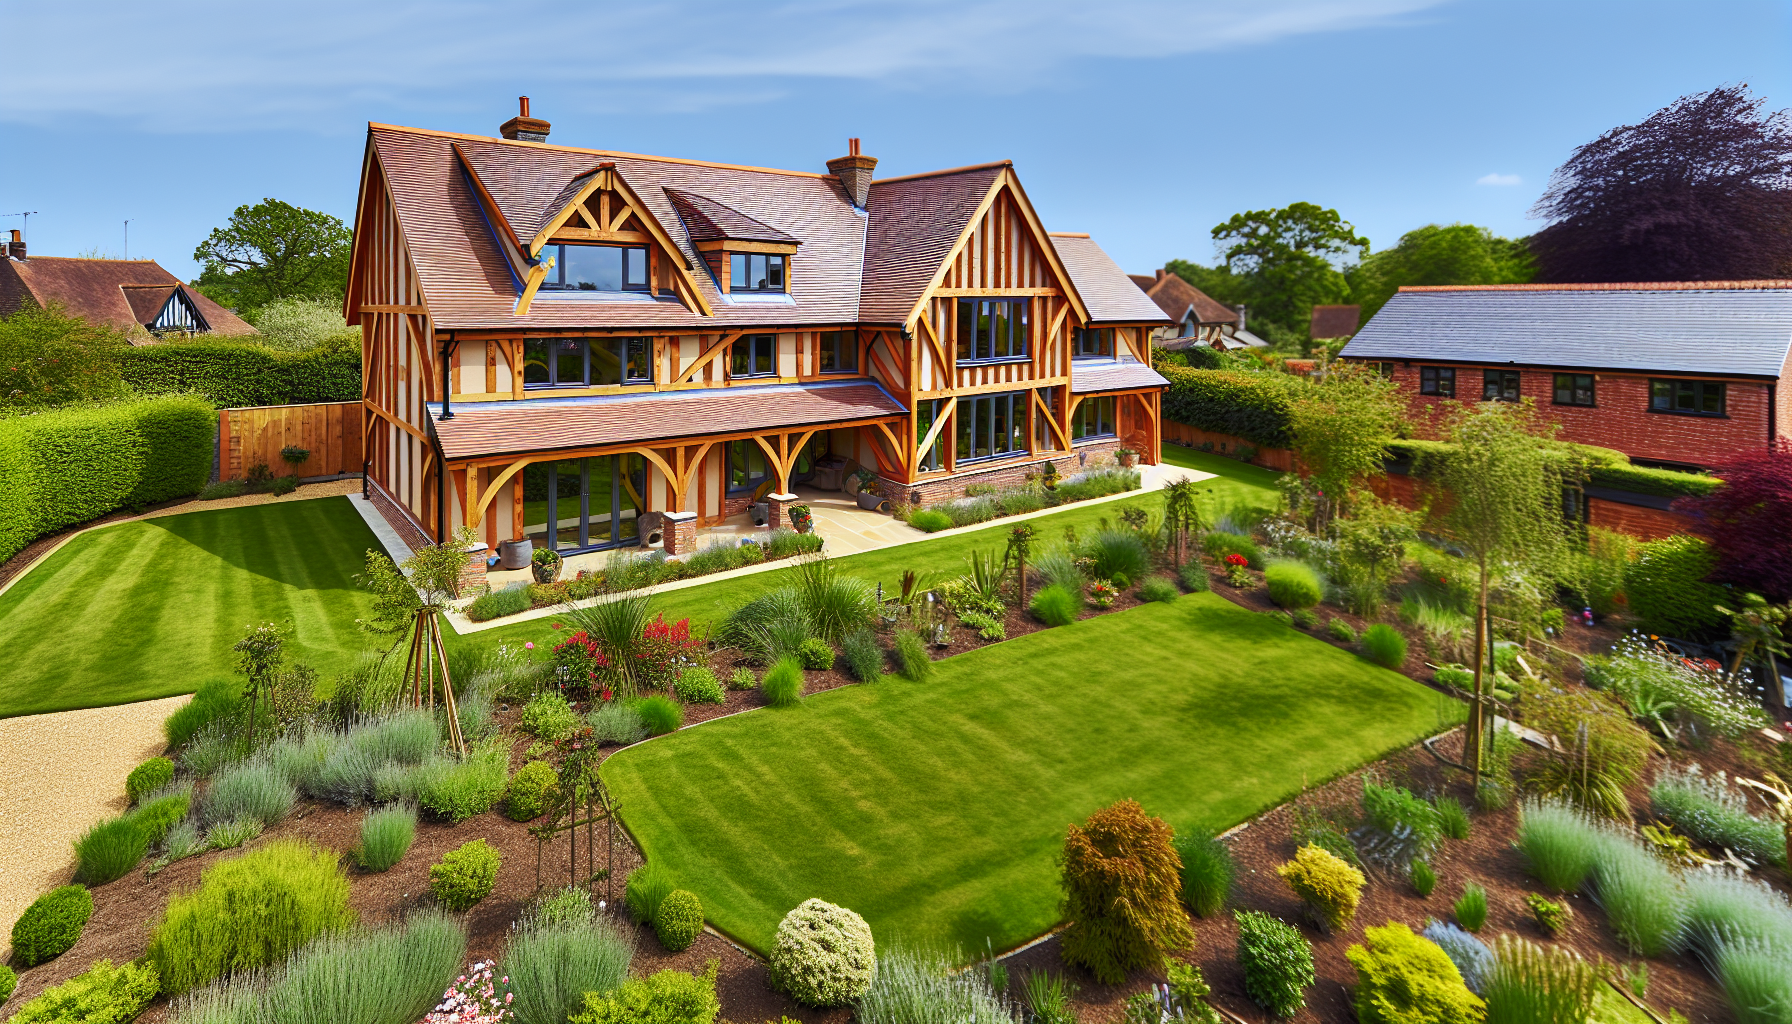 Successful self-build project with timber frame kits